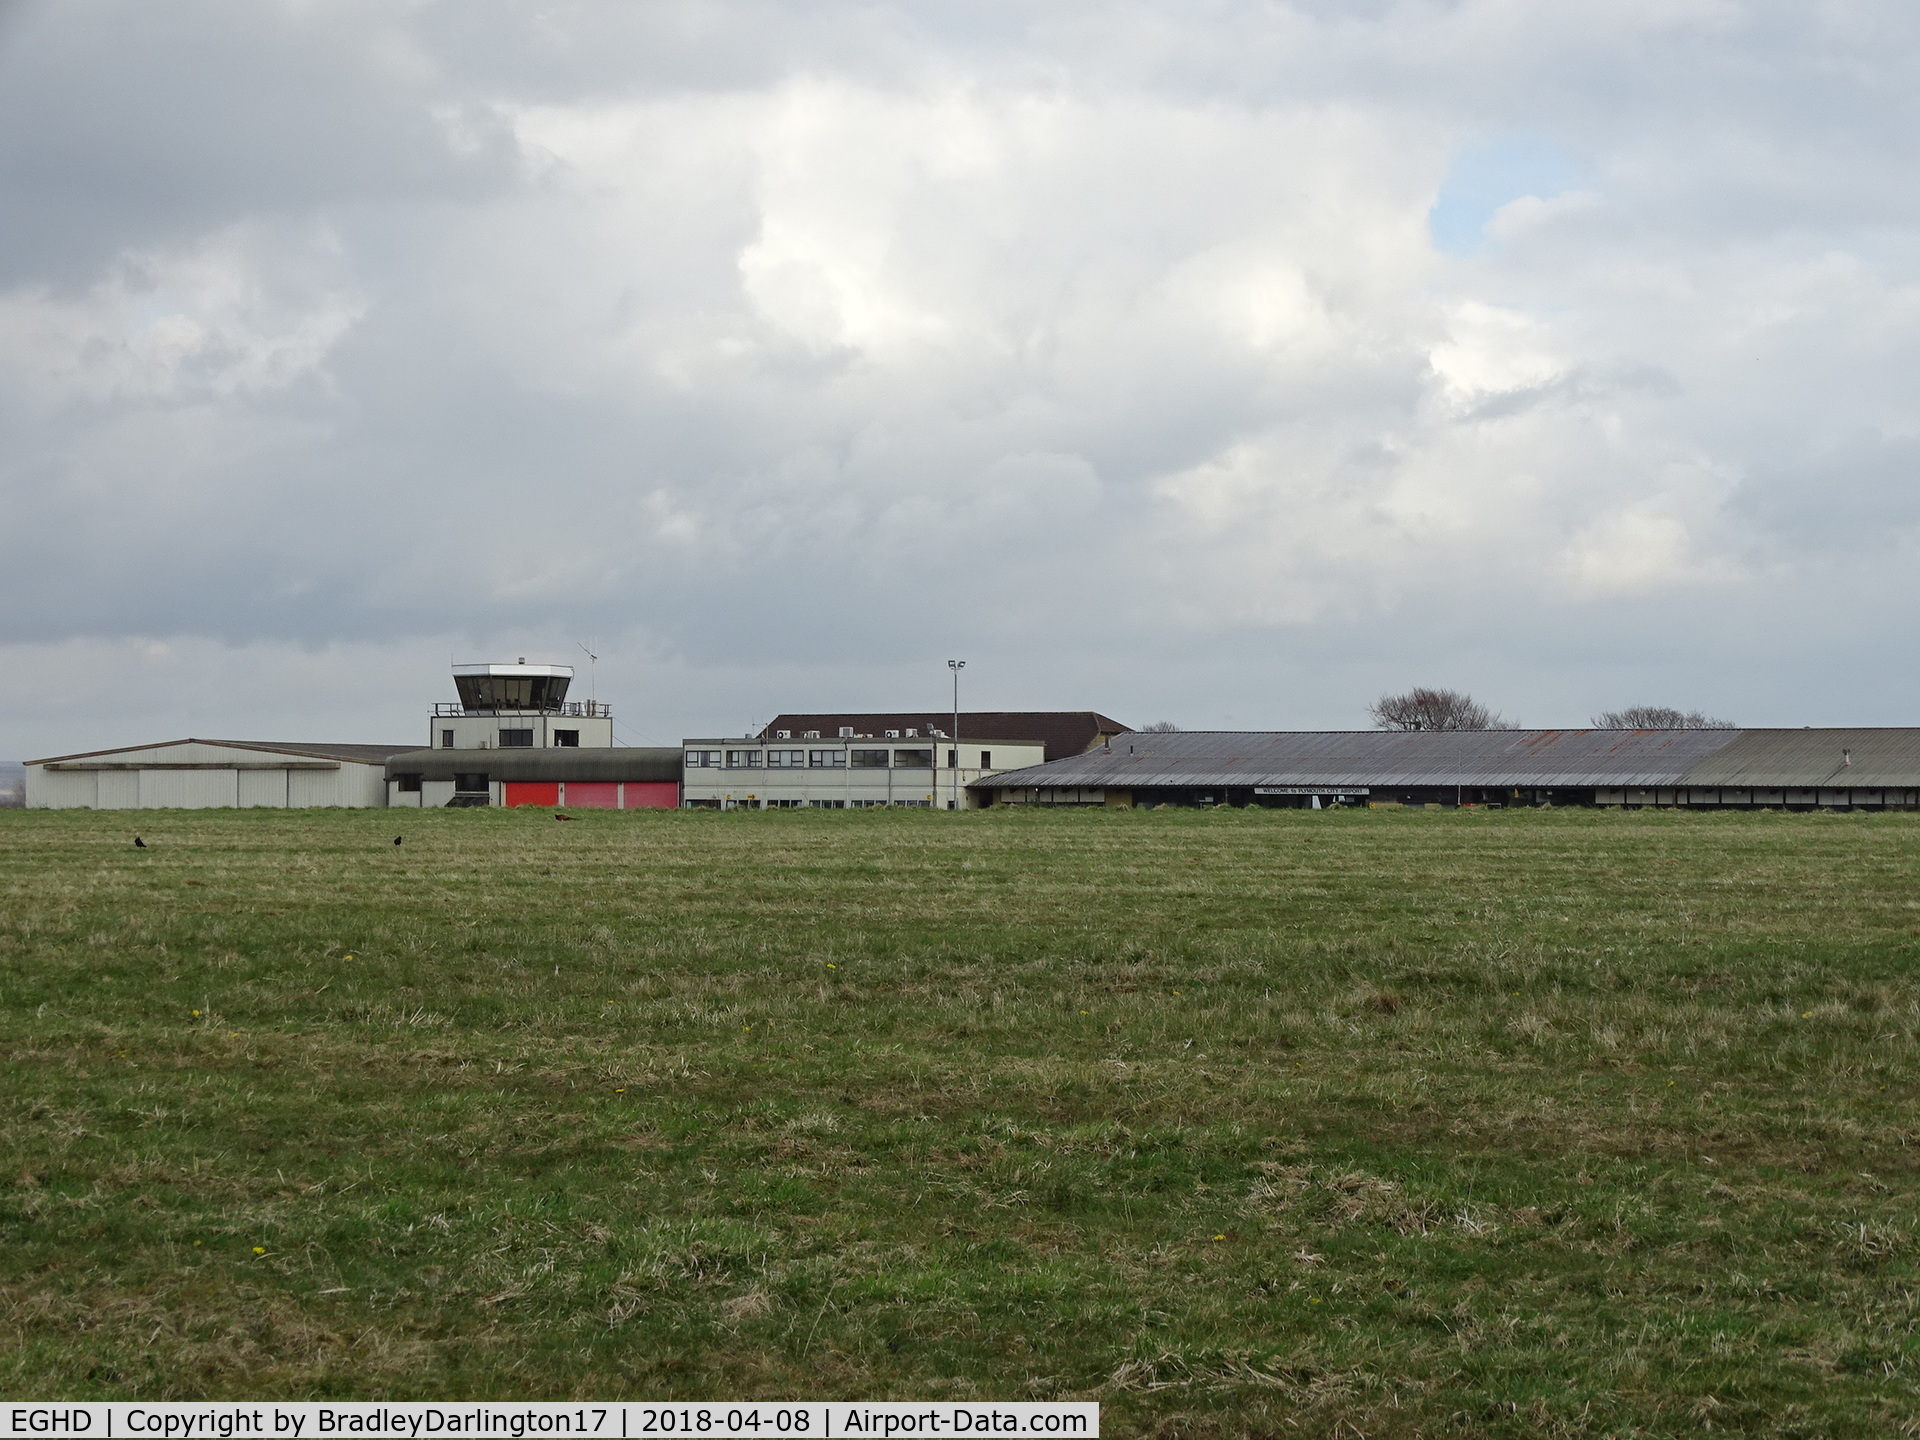 Plymouth City Airport, Plymouth, England United Kingdom (EGHD) - The Closed Plymouth Airport, Planing To Be Reopened Soon